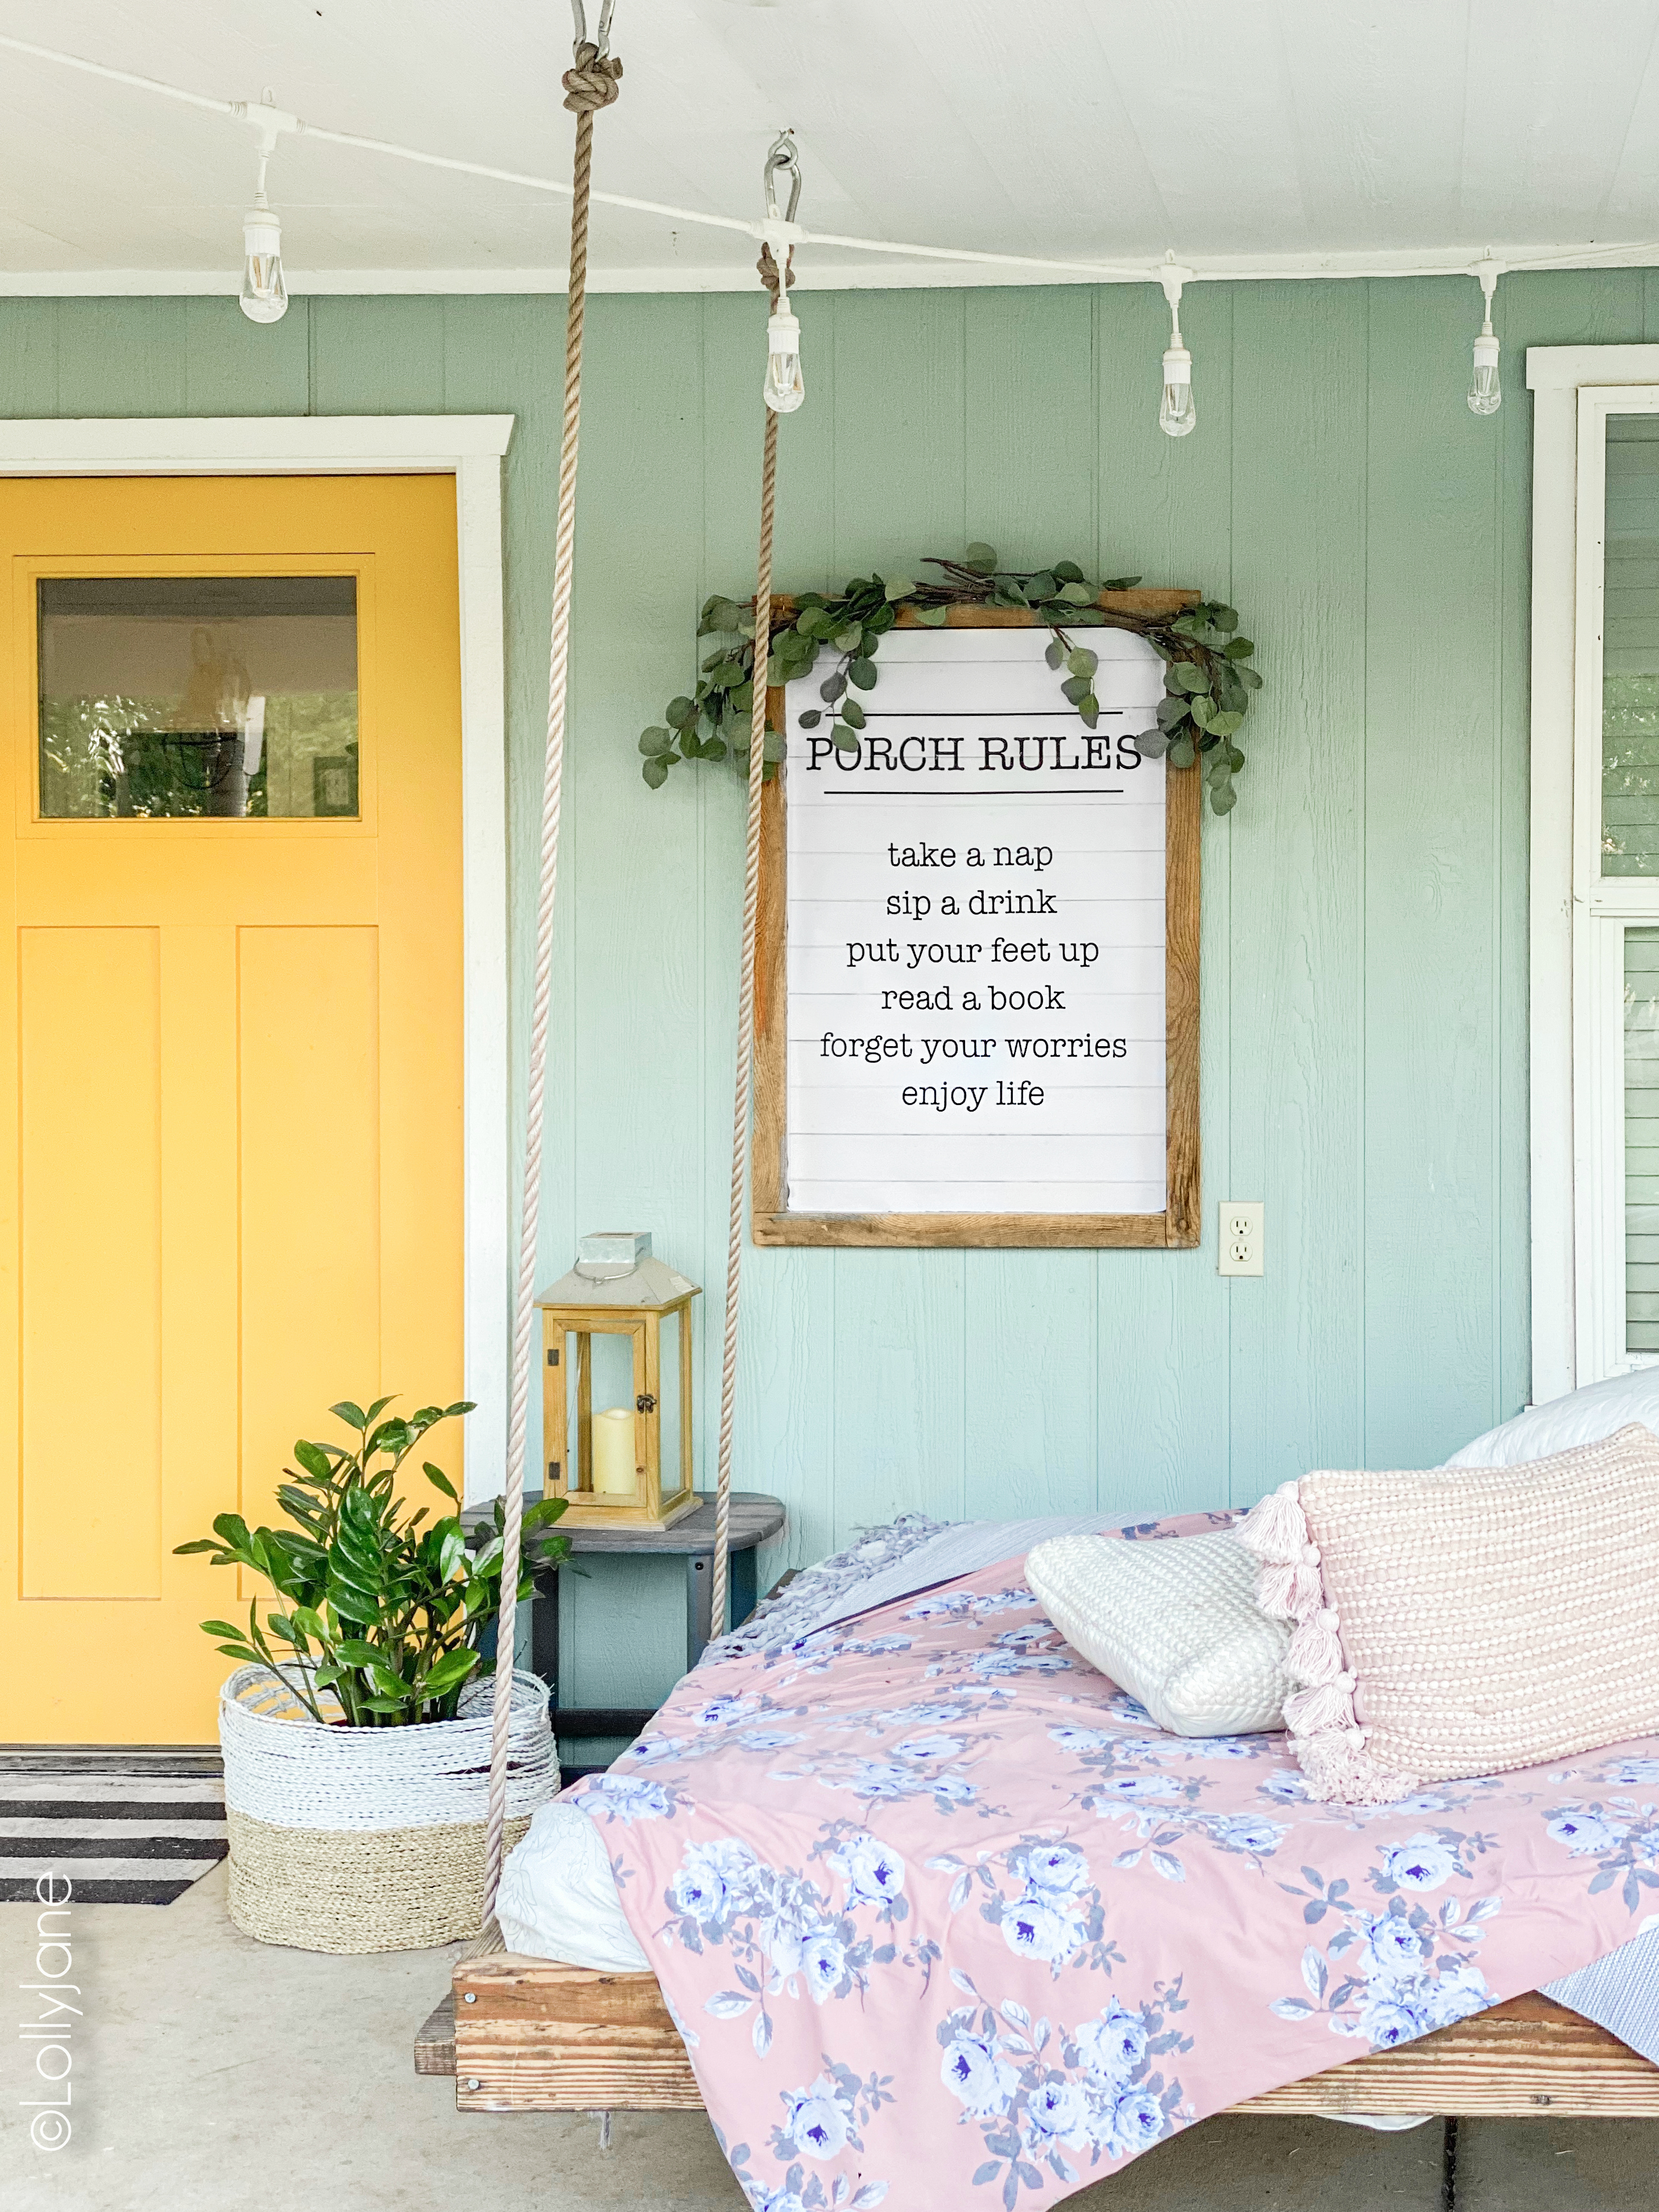 FREE Printable "Porch Rules" art, talk about about the perfect touch to ANY outdoor entertaining space! Just print and frame to instantly cozy up YOUR porch! #freeprintable #printable #printableart #porchdecor #porchhomedecor #backyardliving